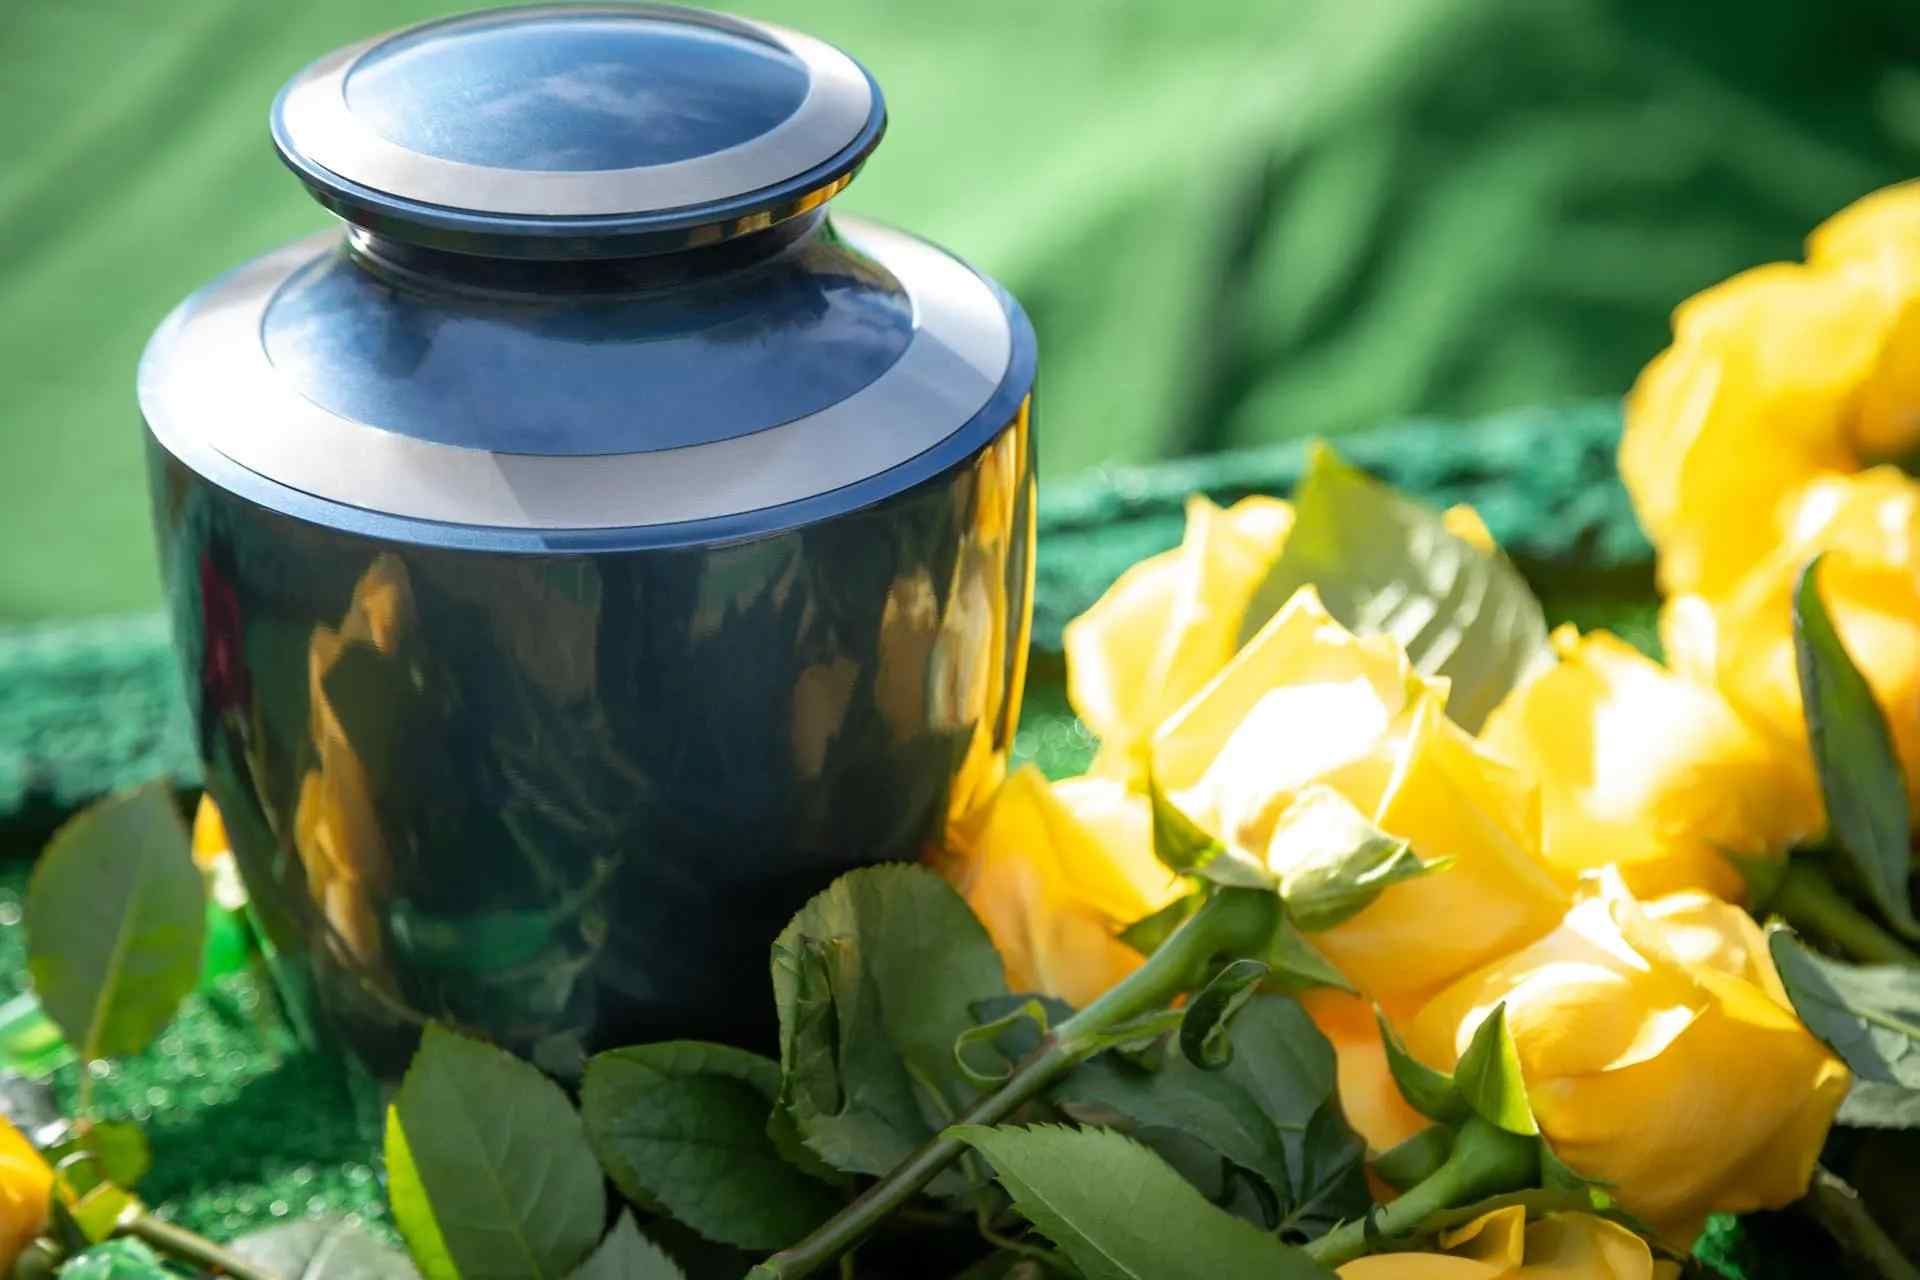 Cremation Services  at Spilsbury Mortuary in St George, UT